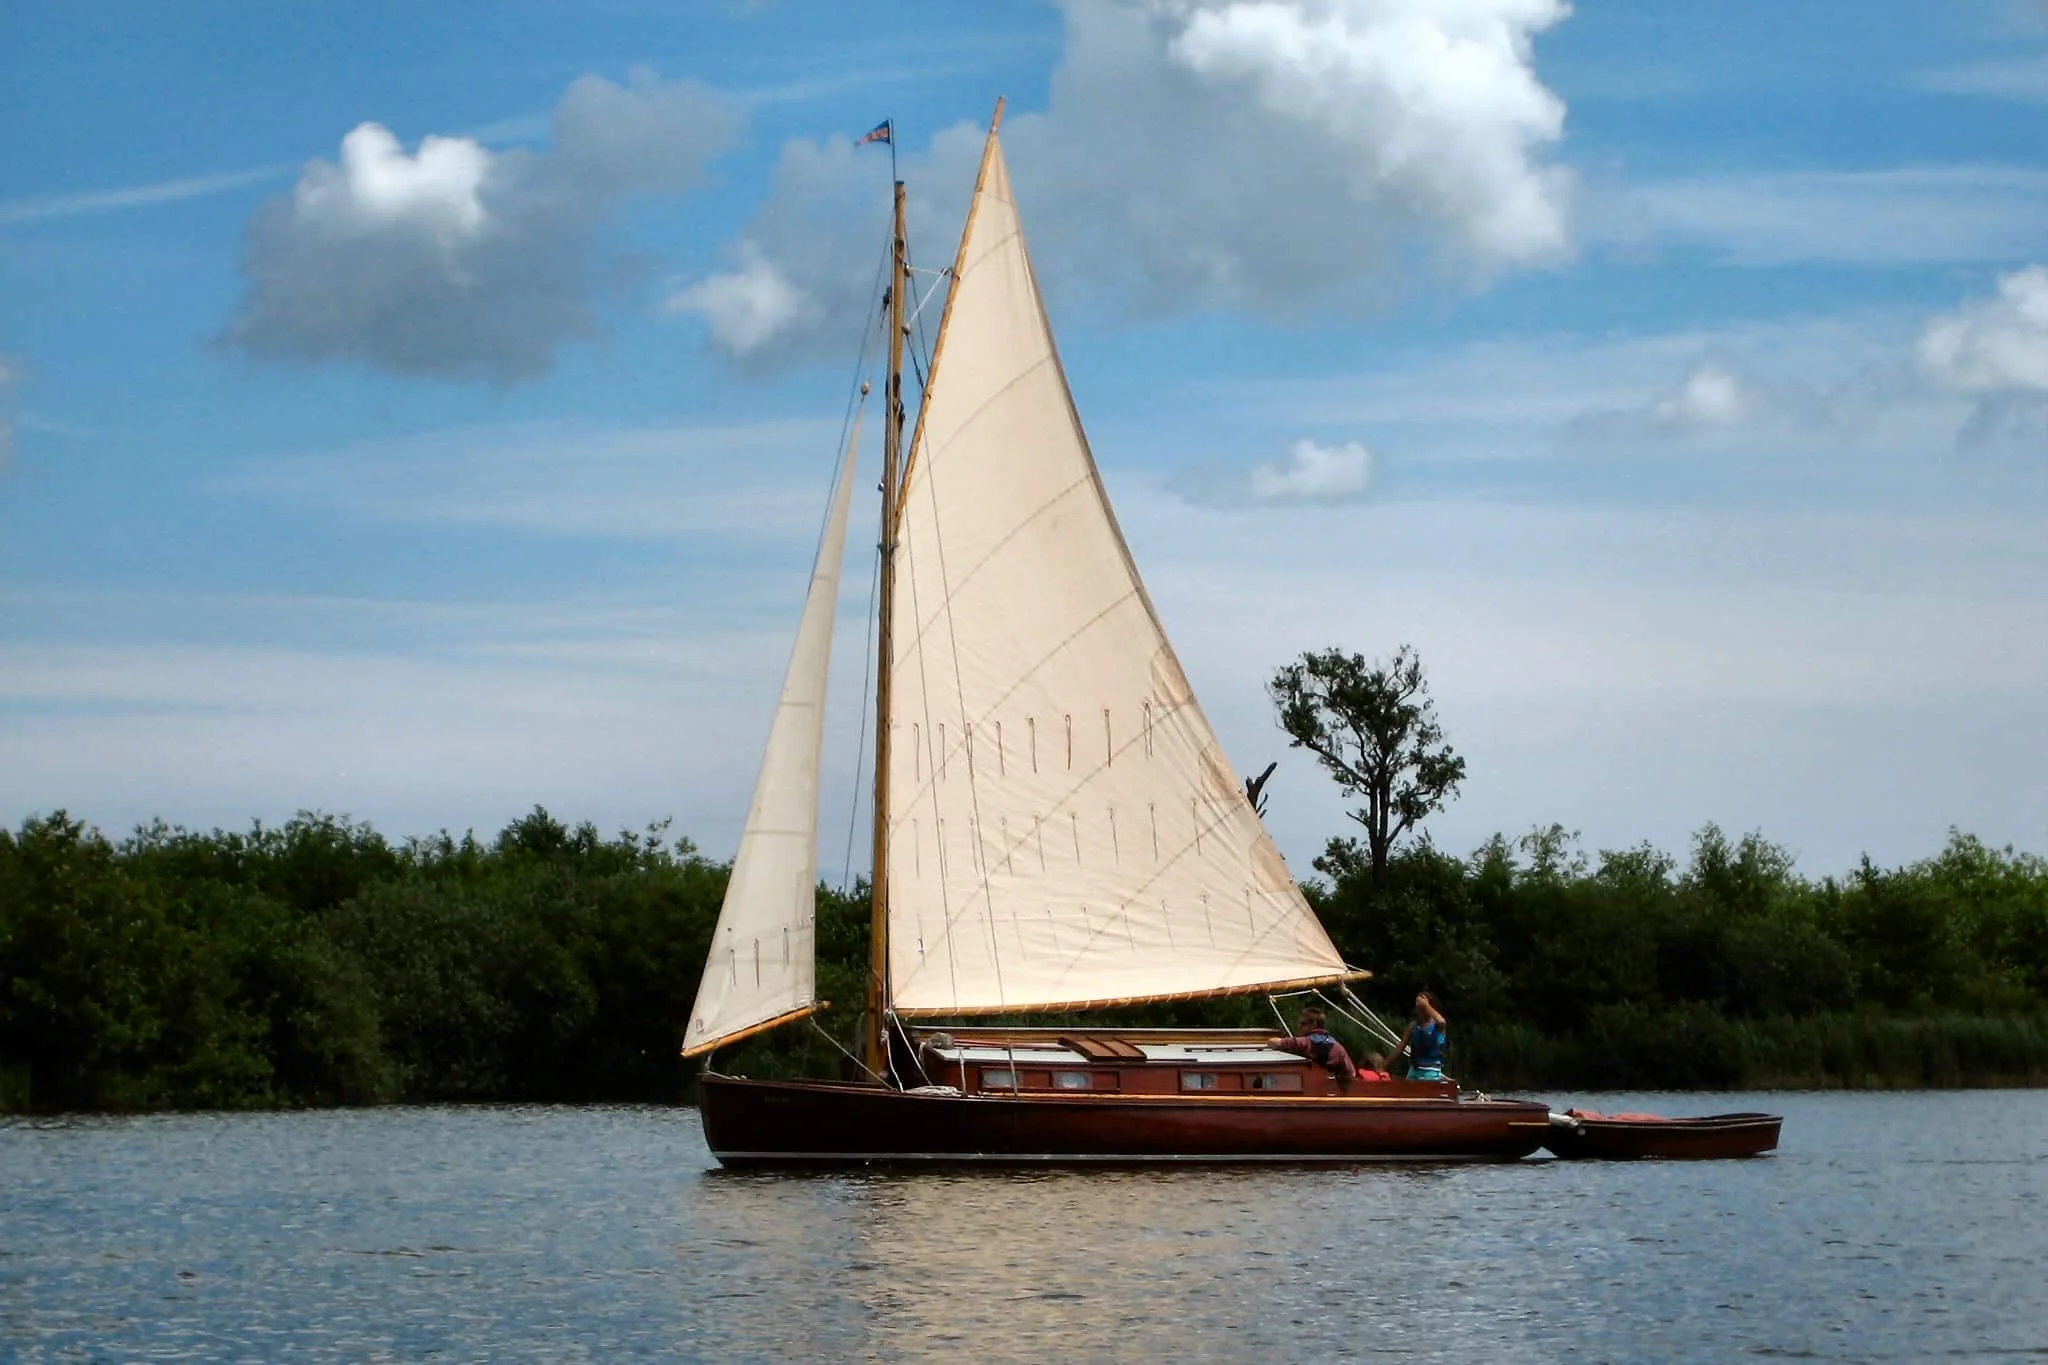 Hunter Fleet cabin yacht sailing. The same type of boat used for cabin conversion courses.